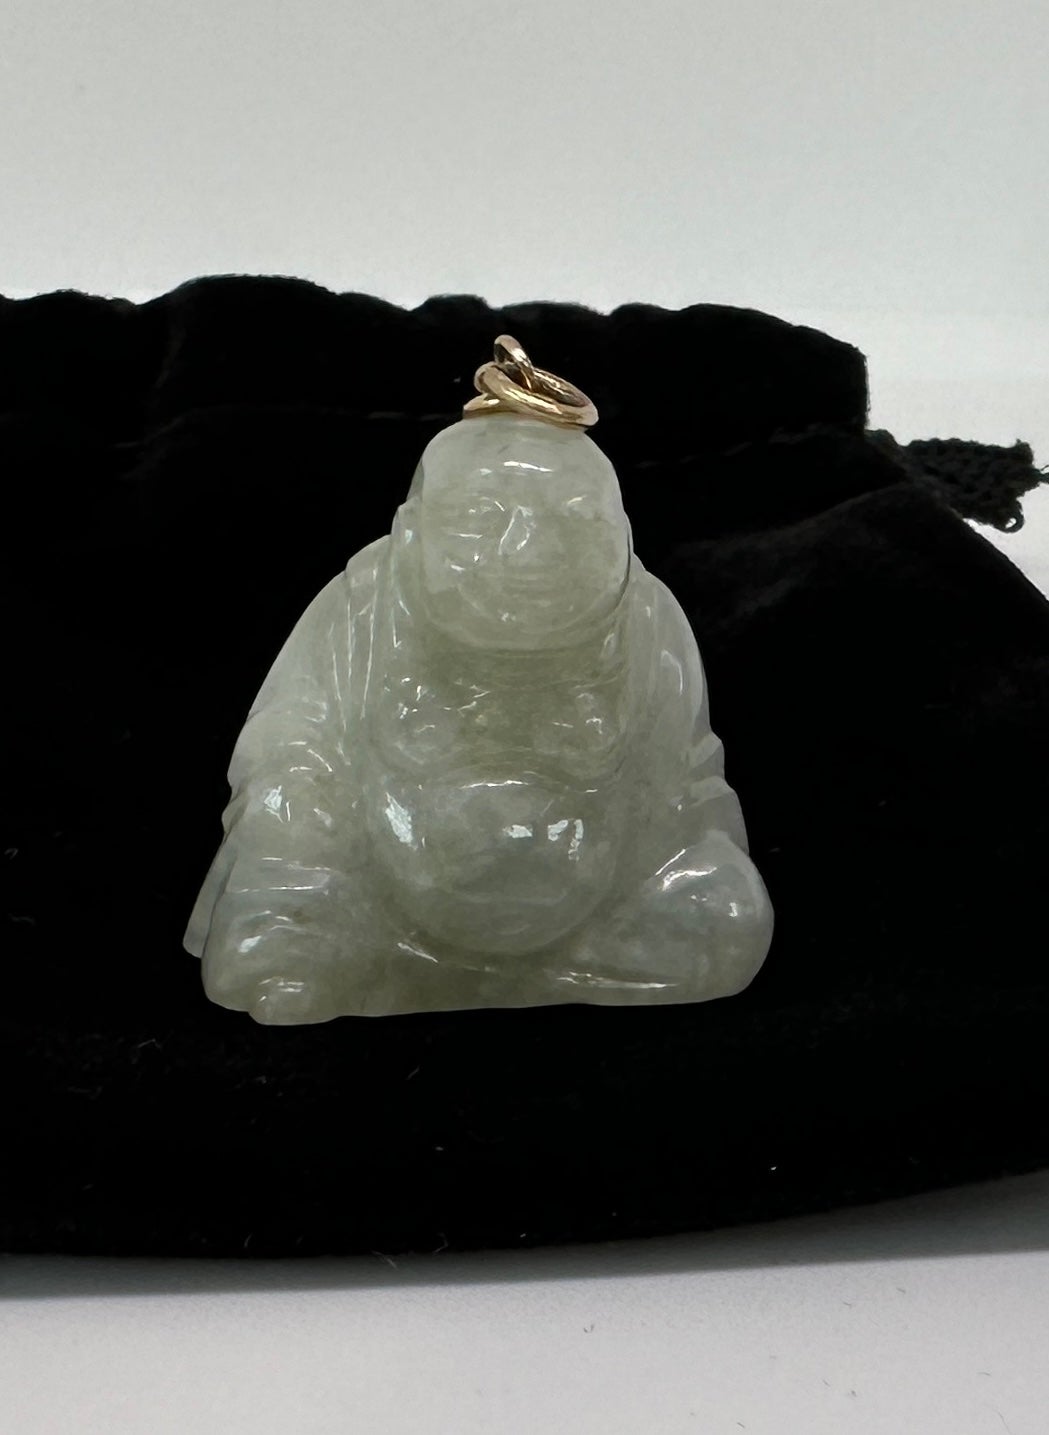 This is a wonderful antique Art Deco Jade Smiling Fat Buddha Pendant in 14 Karat Gold.  The Buddha is exquisitely carved in natural Jade.  The Buddha with his radiant smile and Fat Buddha Belly is also known as the Buddha of Happiness, and the